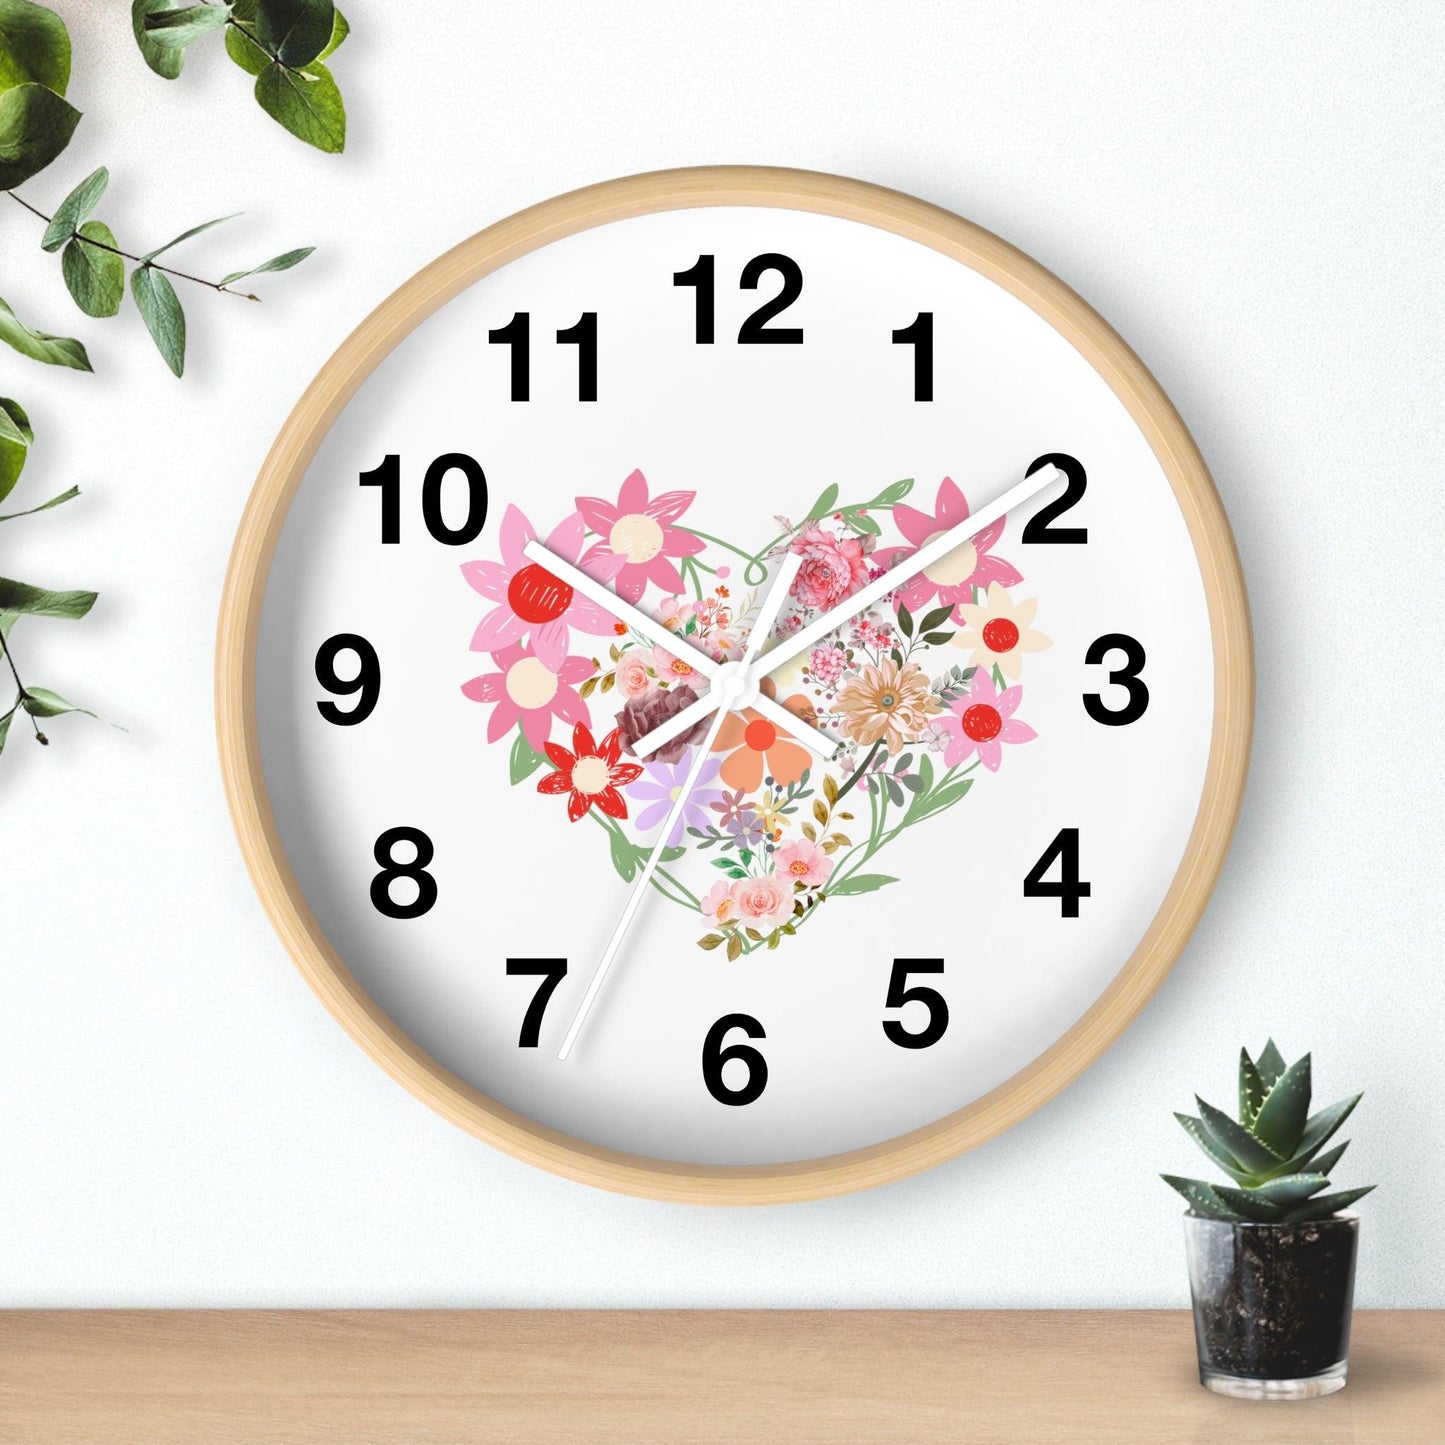 Flower wall clock, Flower Heart Wall clock, Floral Wall Clock, Home decor gift, House Warming gift, New Home Gift, Mom gift